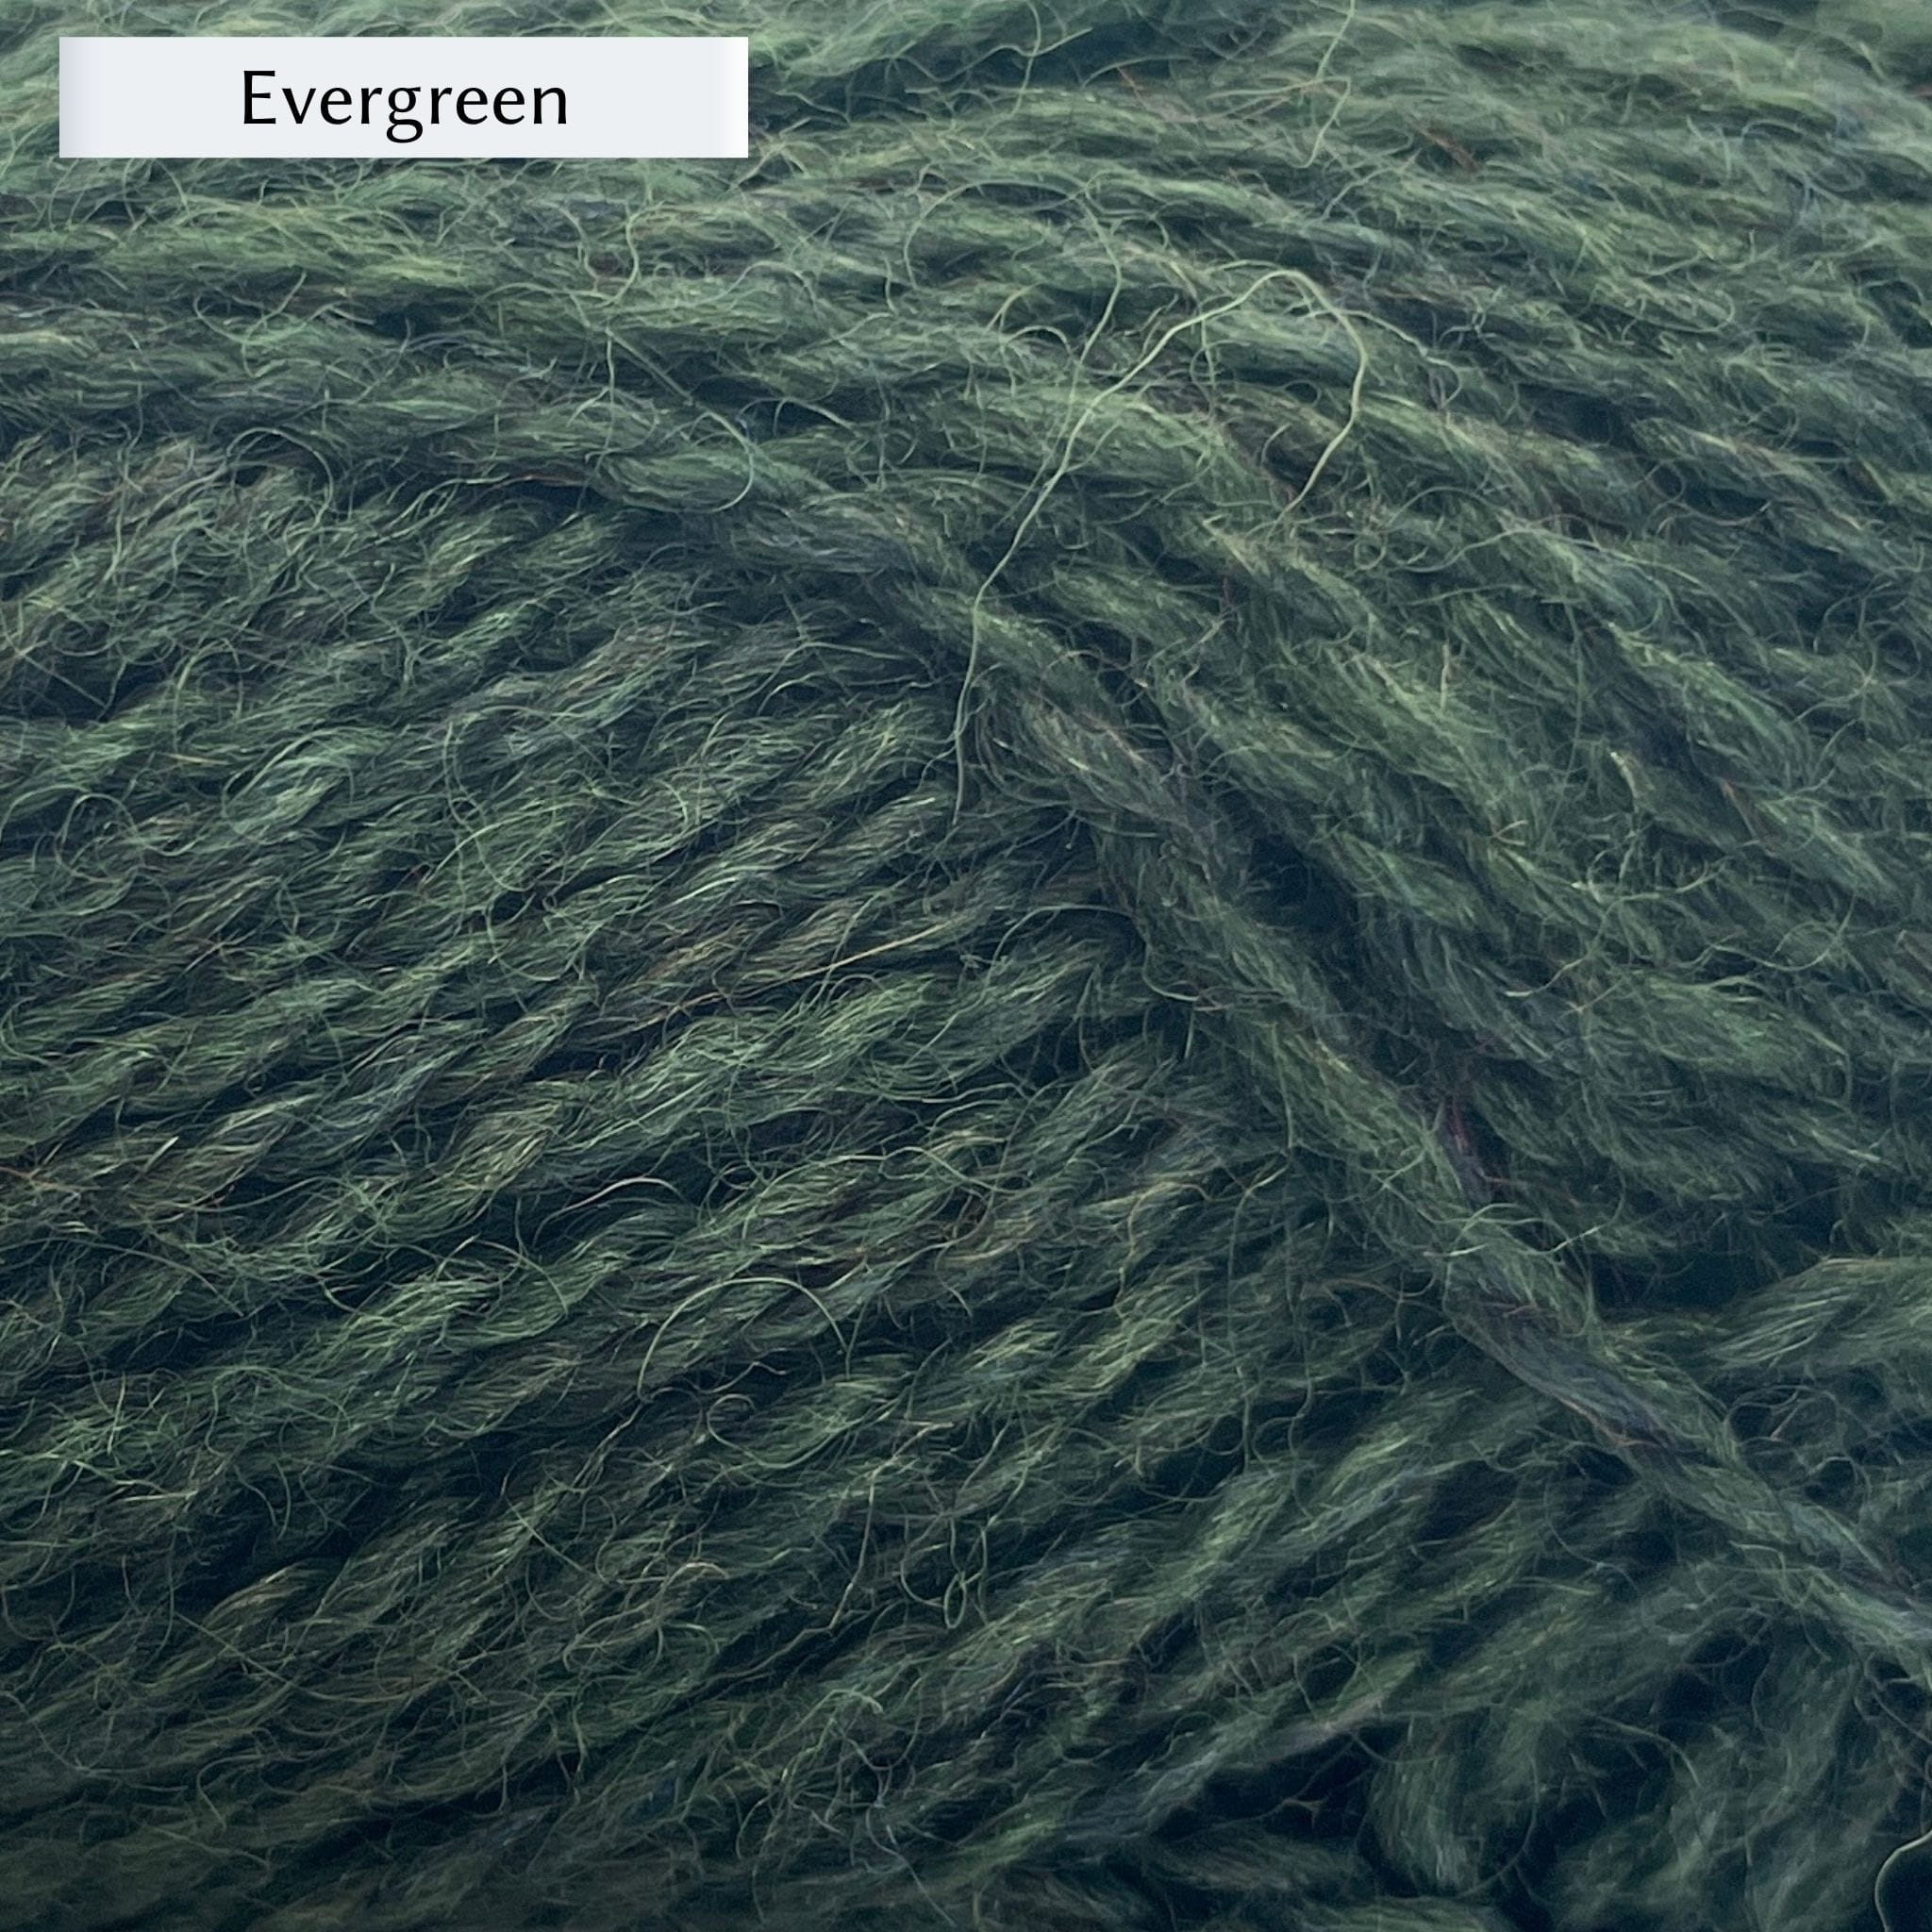 Marie Wallin's British Breeds yarn, a fingering weight, in color Evergreen, a pine green